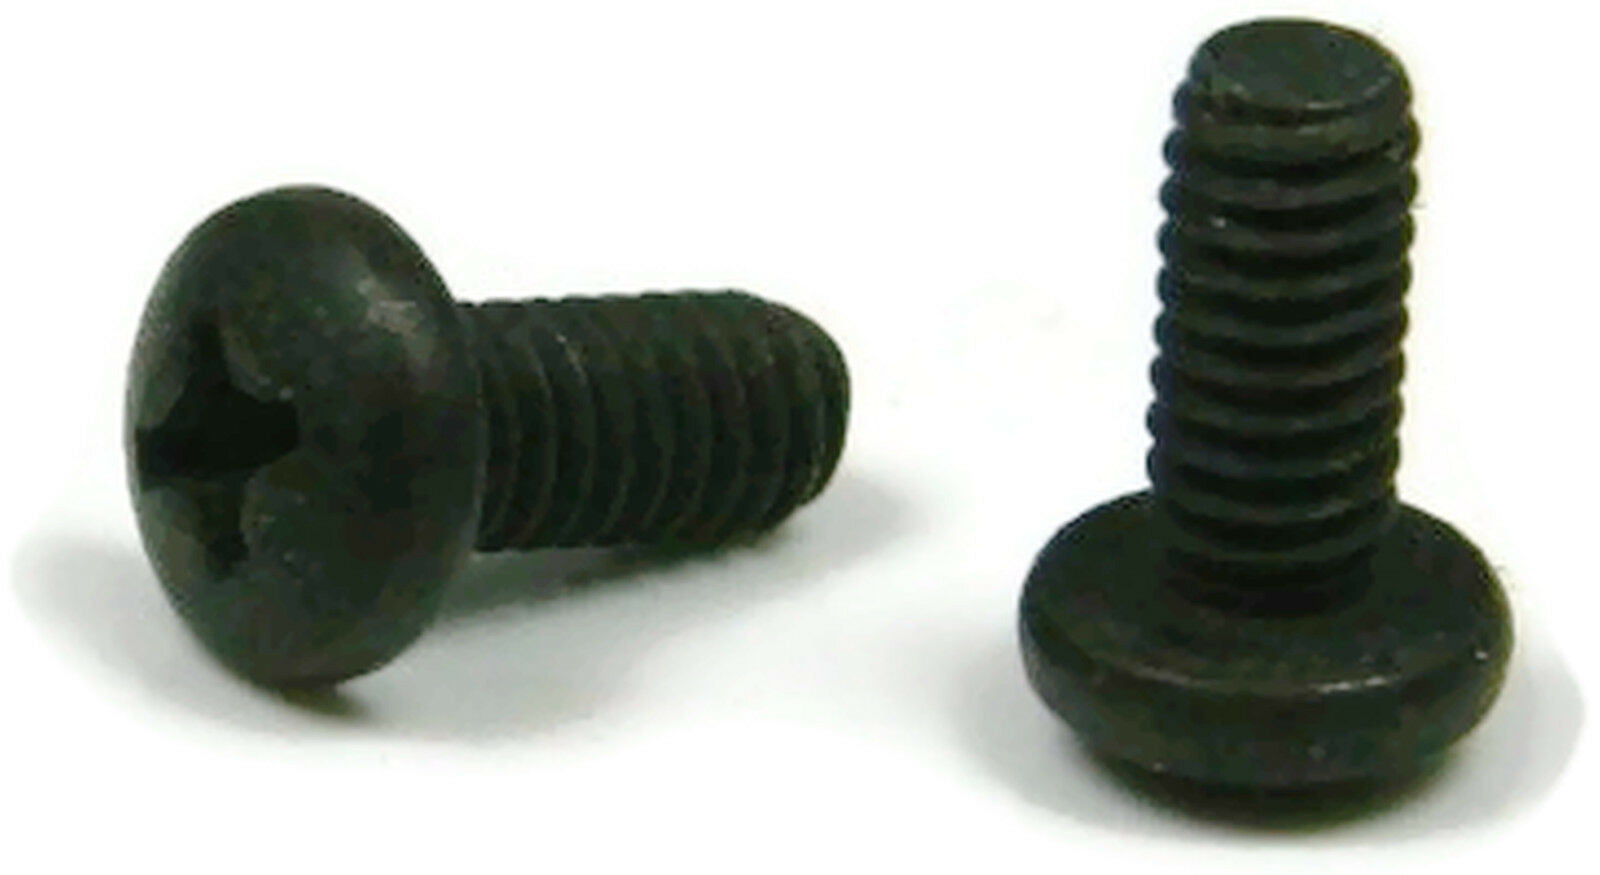 Black Oxide Stainless Phillips Pan Head Machine Screw  1/4-20 x 3/4 Qty 25 